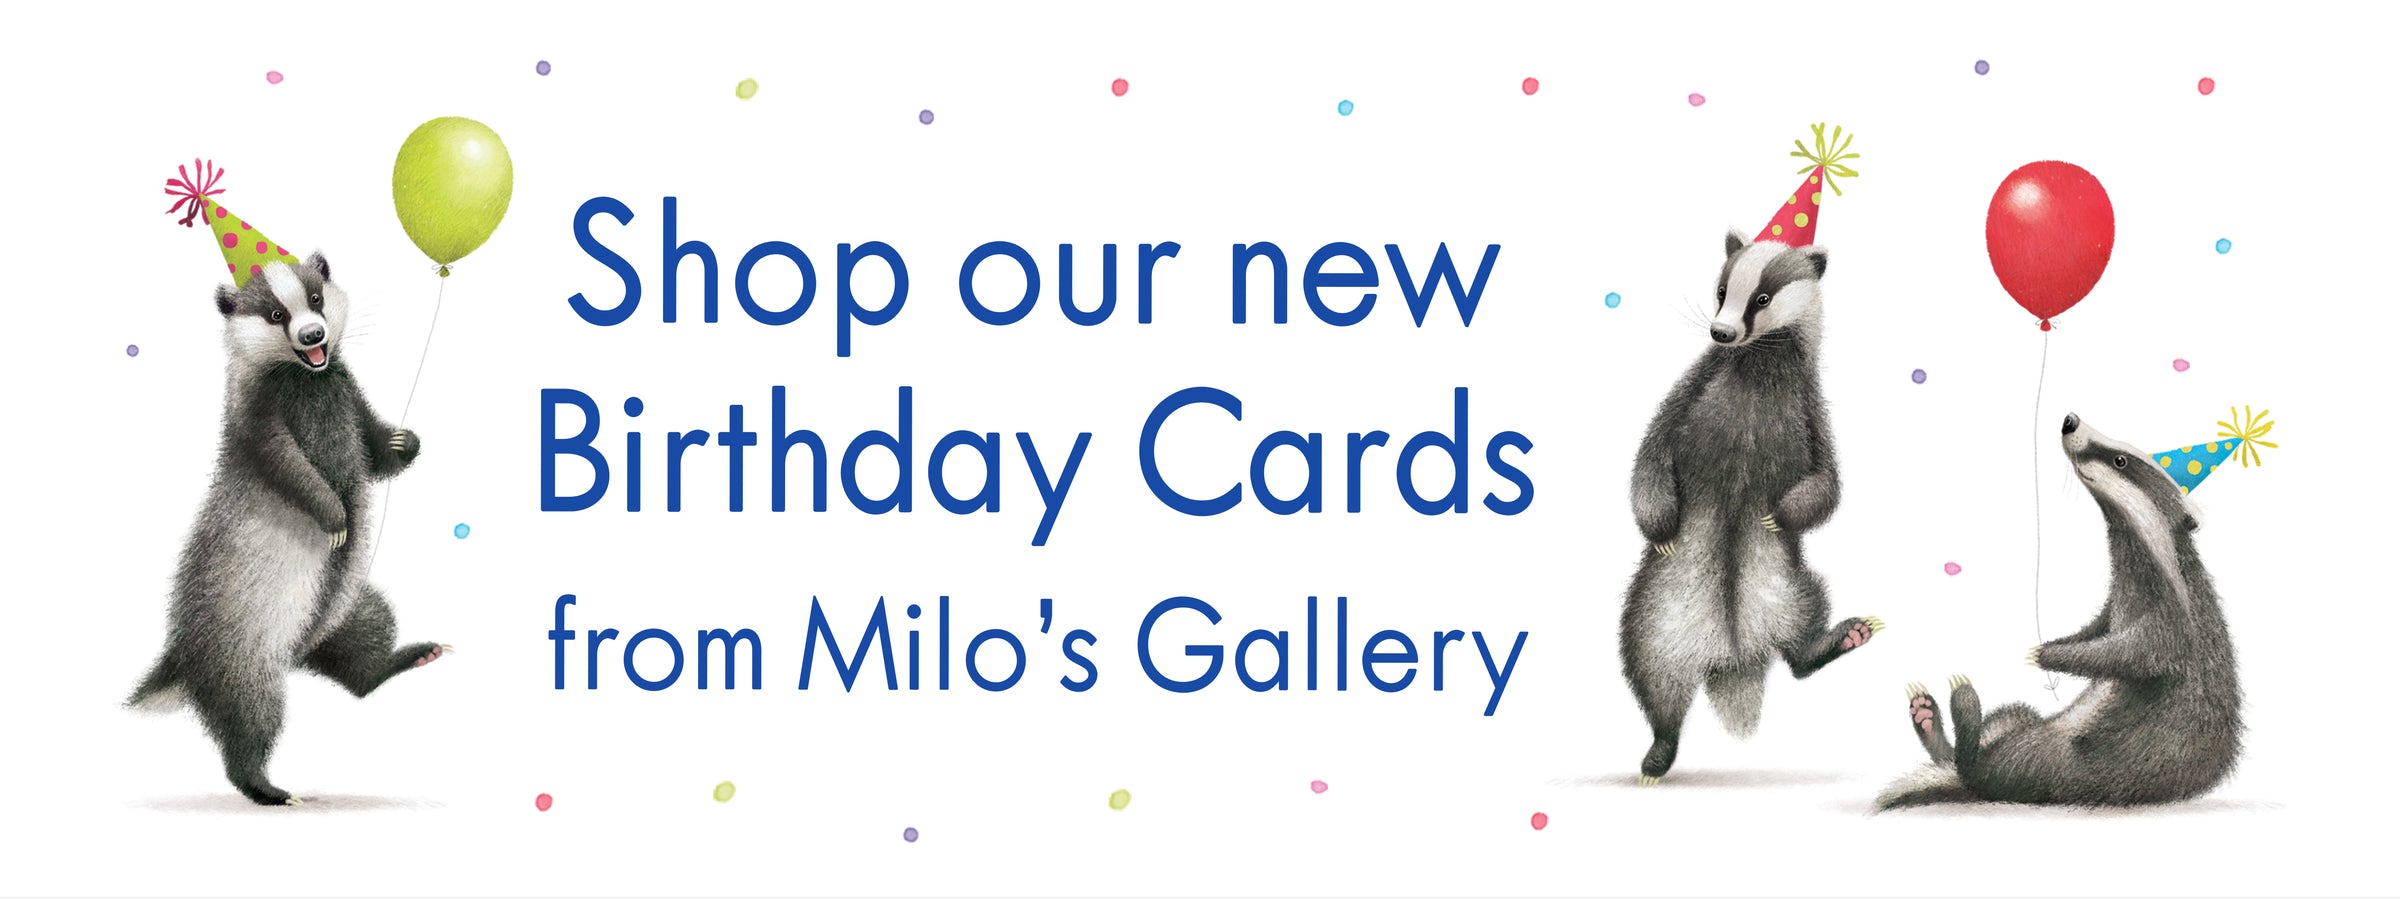 Hunts England - Shop Our New Birthday Cards - From Milo's Gallery